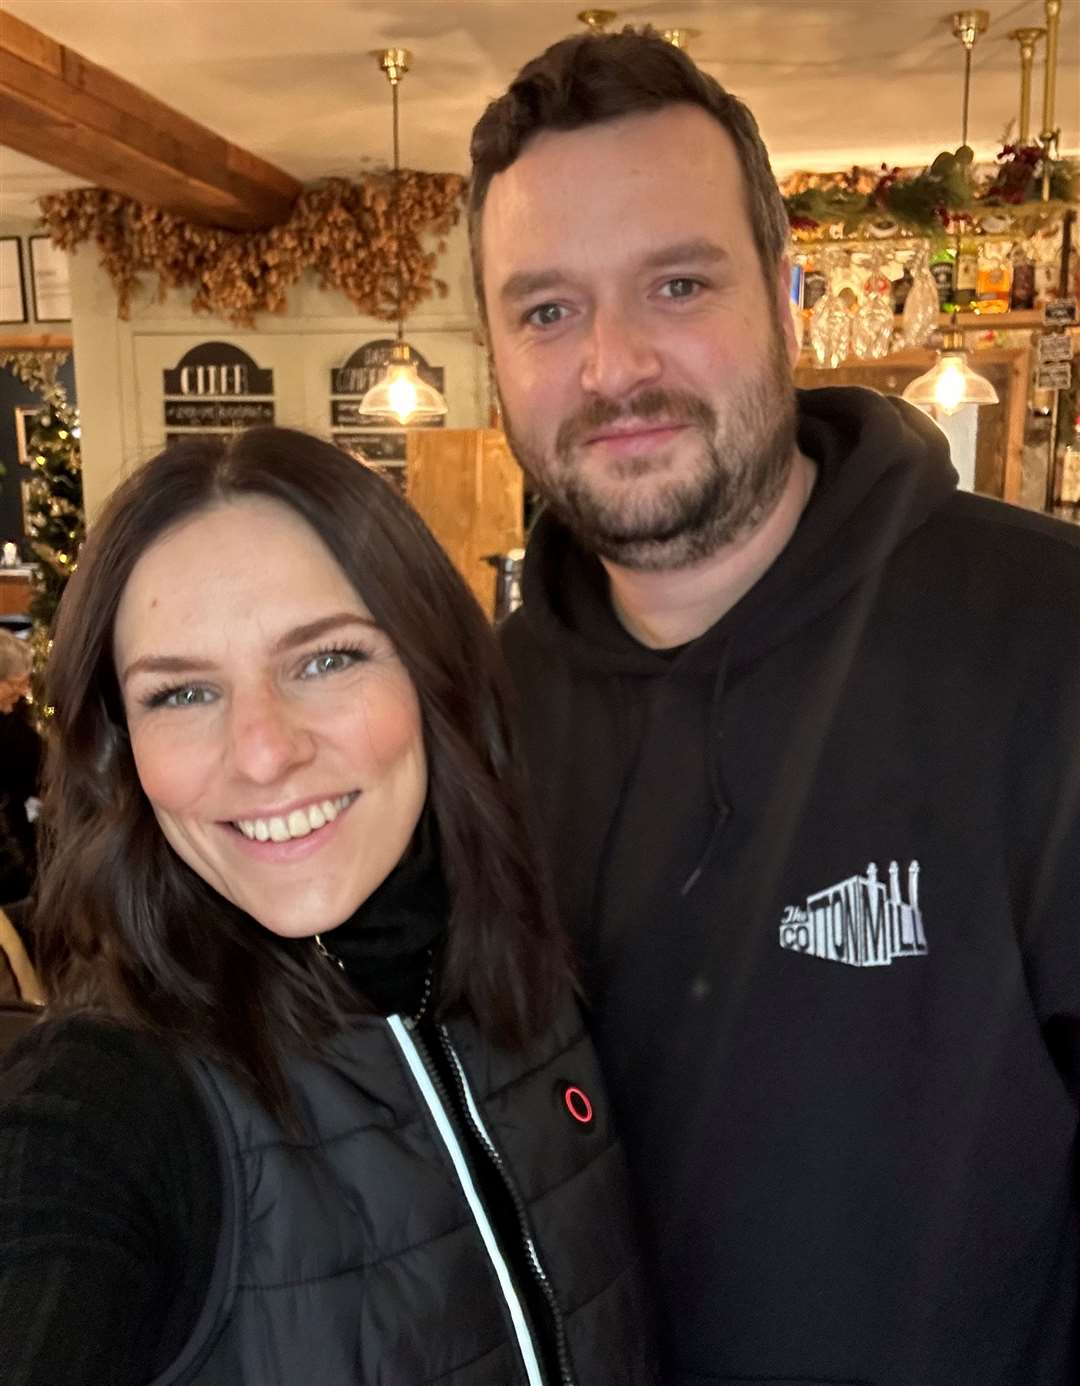 Sasha and Dave Miller opened The Cotton Mill in Station Road, Swanley, in 2018